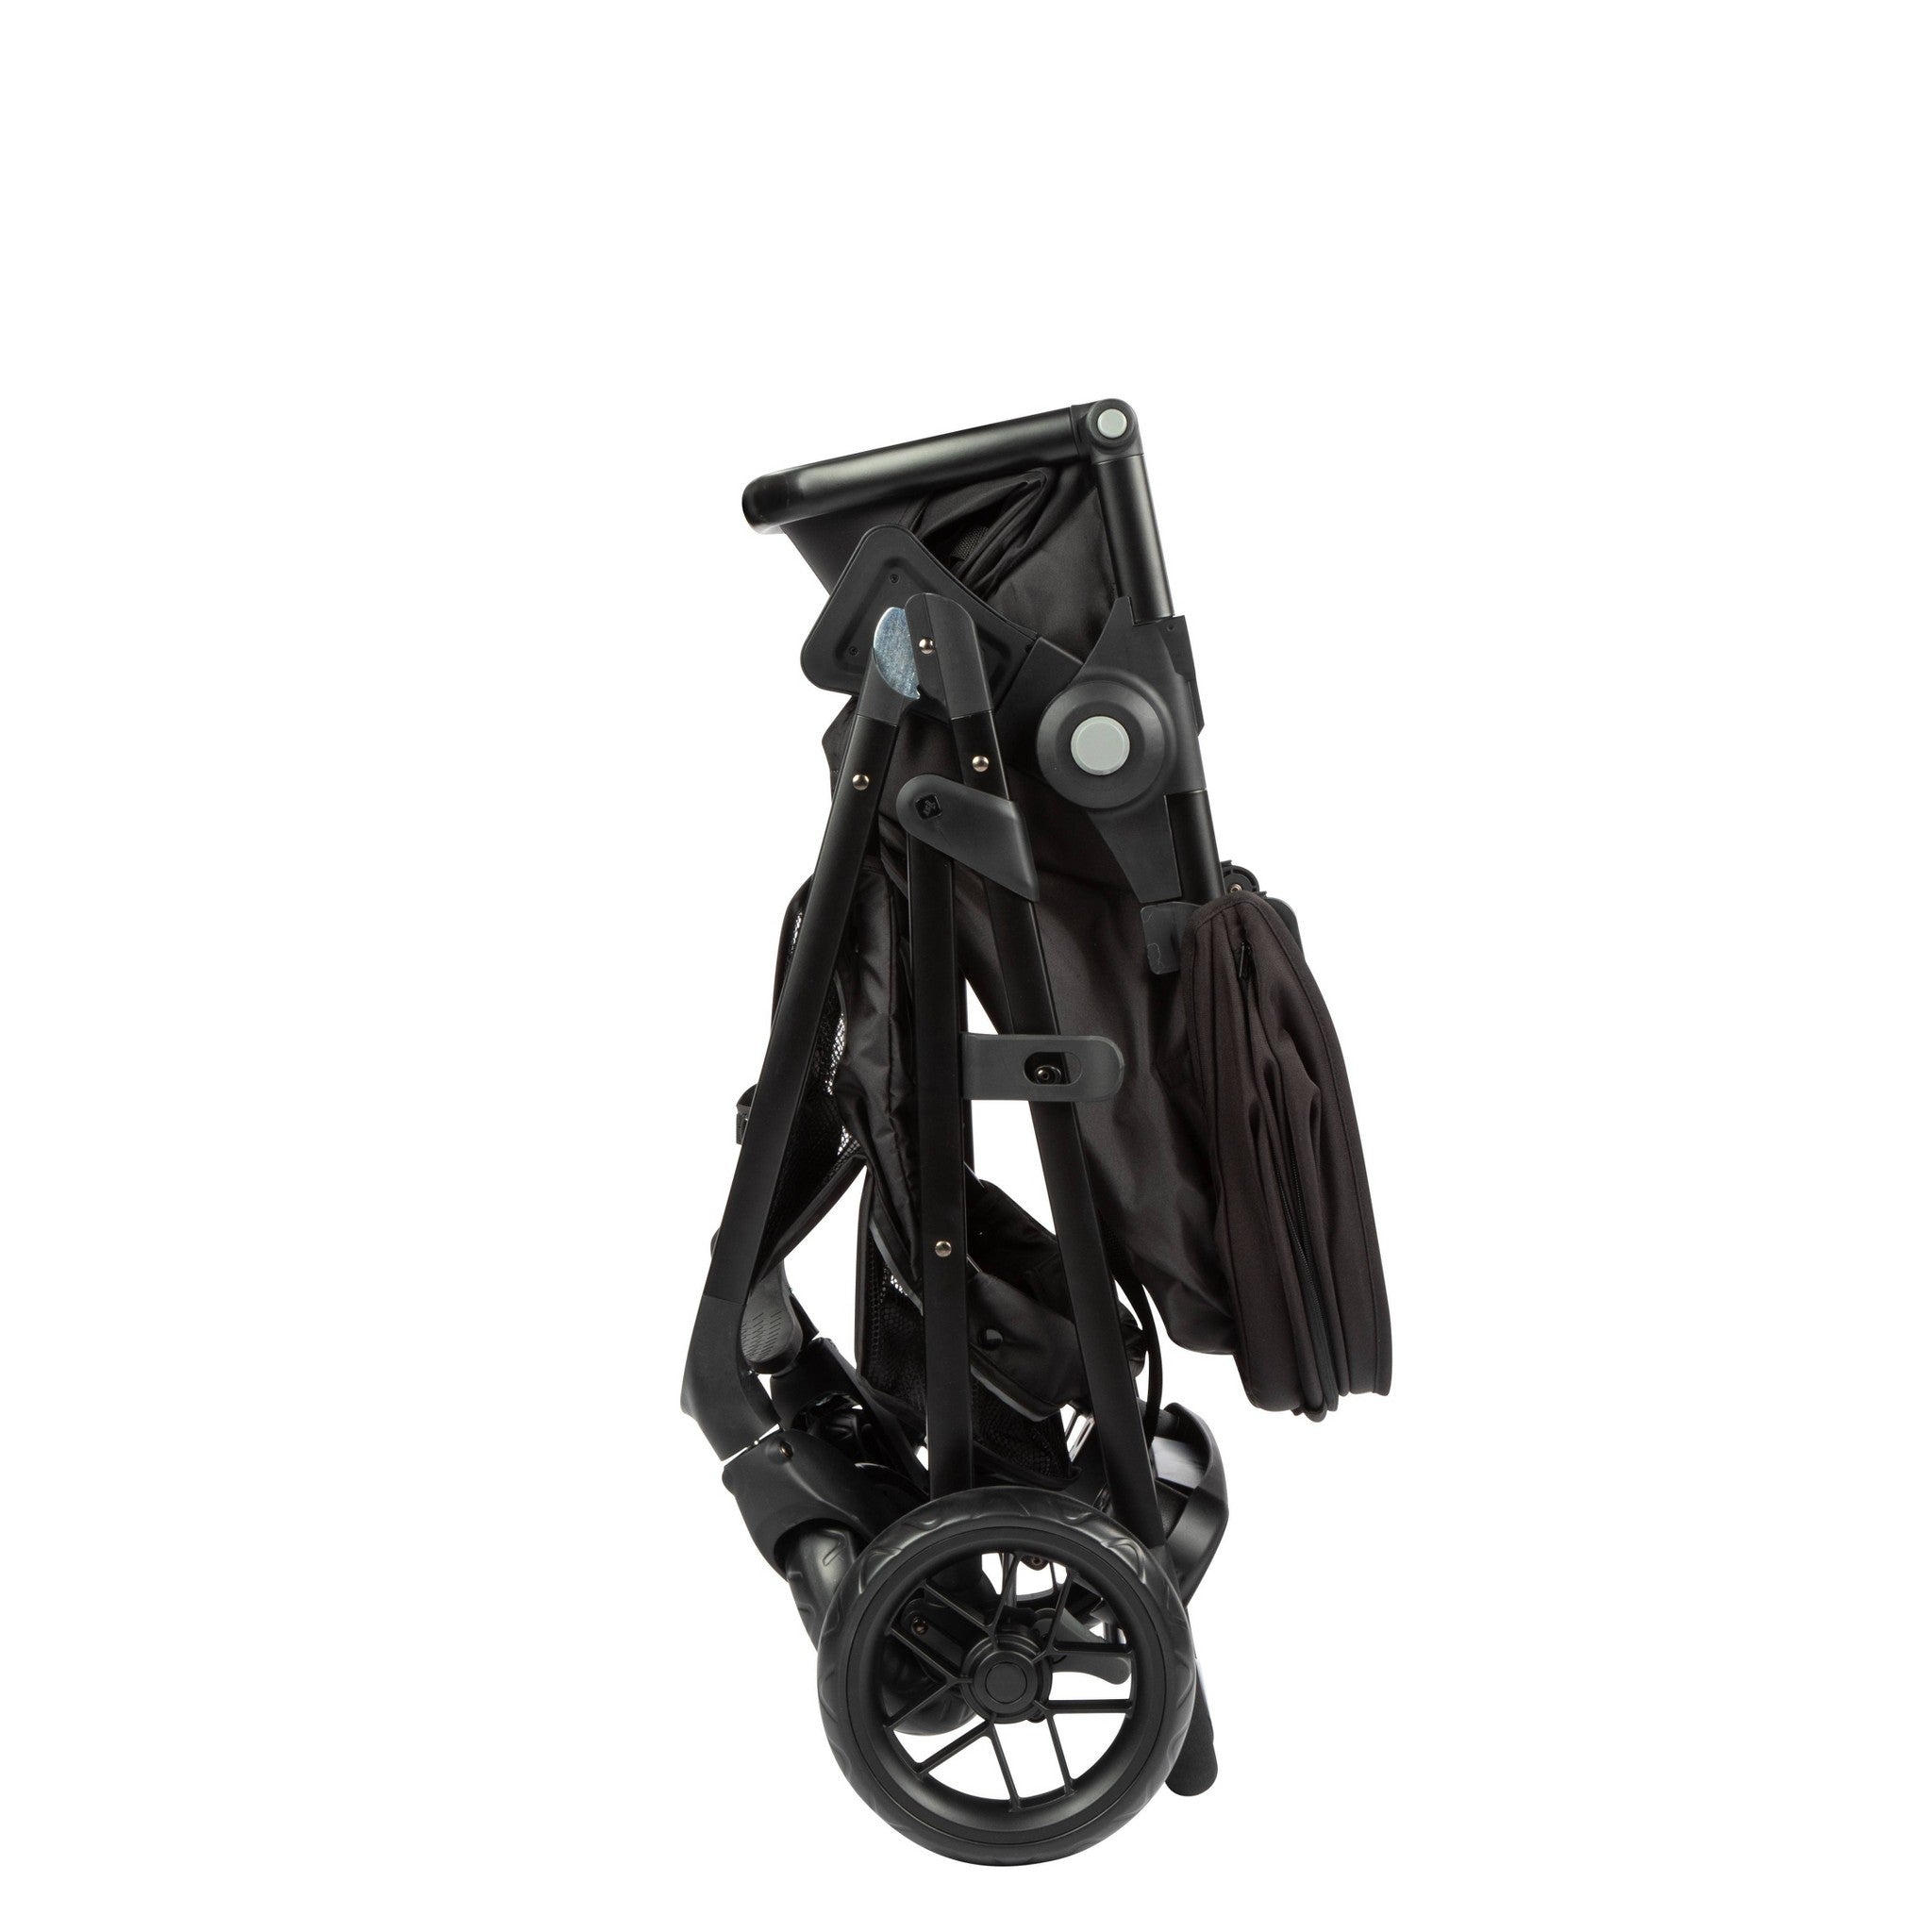 Deluxe Grow and Go™ Flex 8-in-1 Travel System